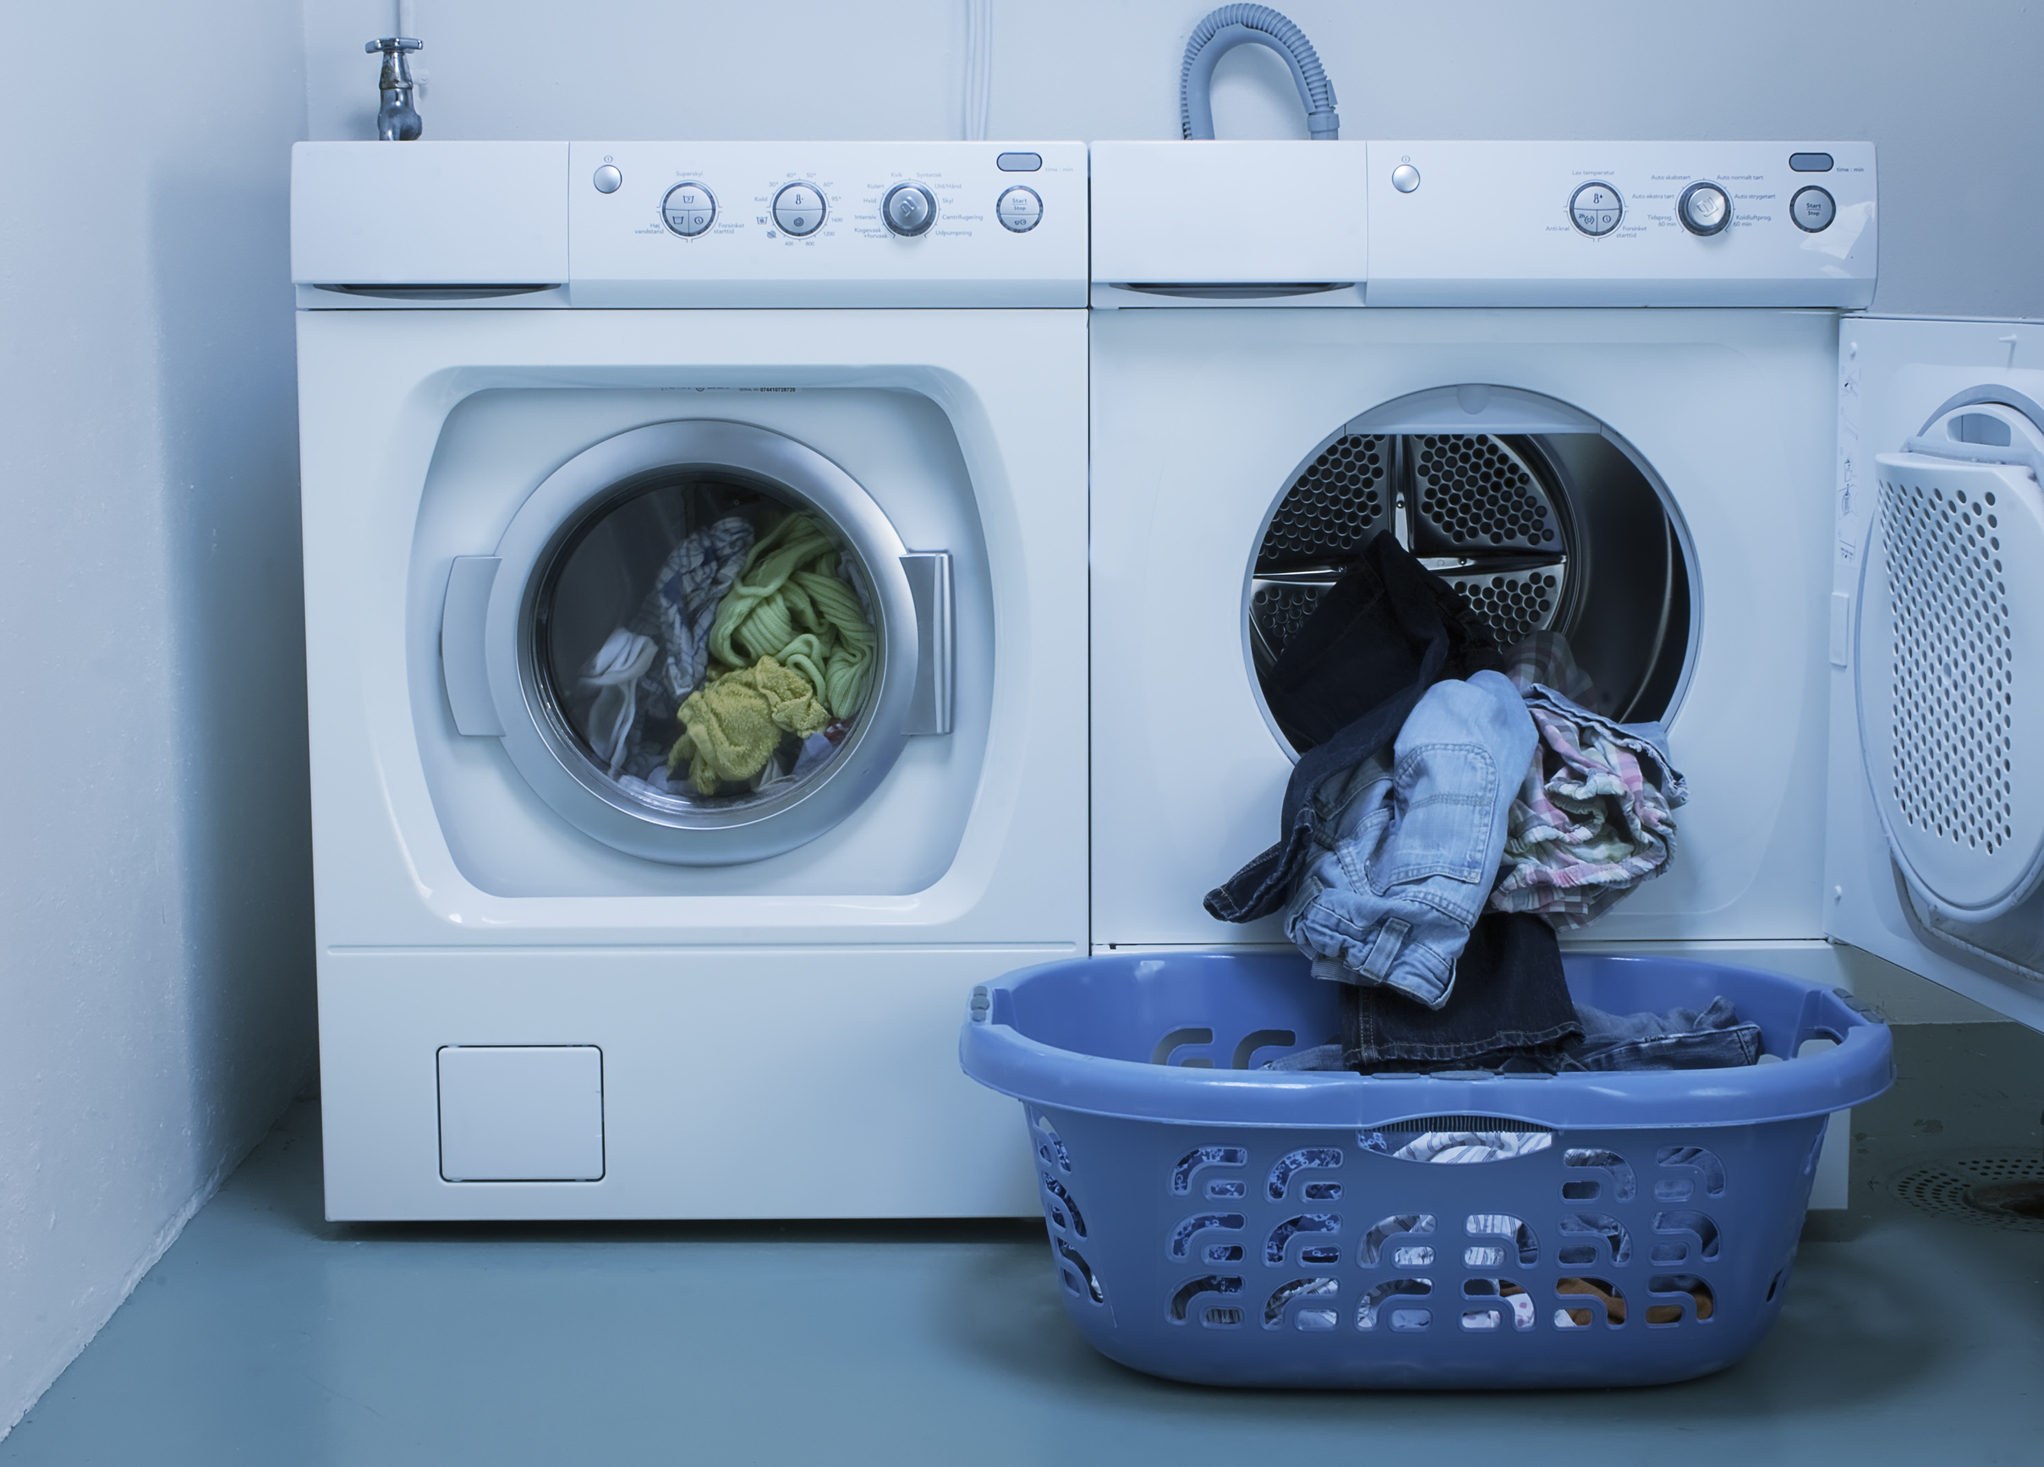 15 Things That Should Never Go in the Clothes Dryer • Everyday Cheapskate